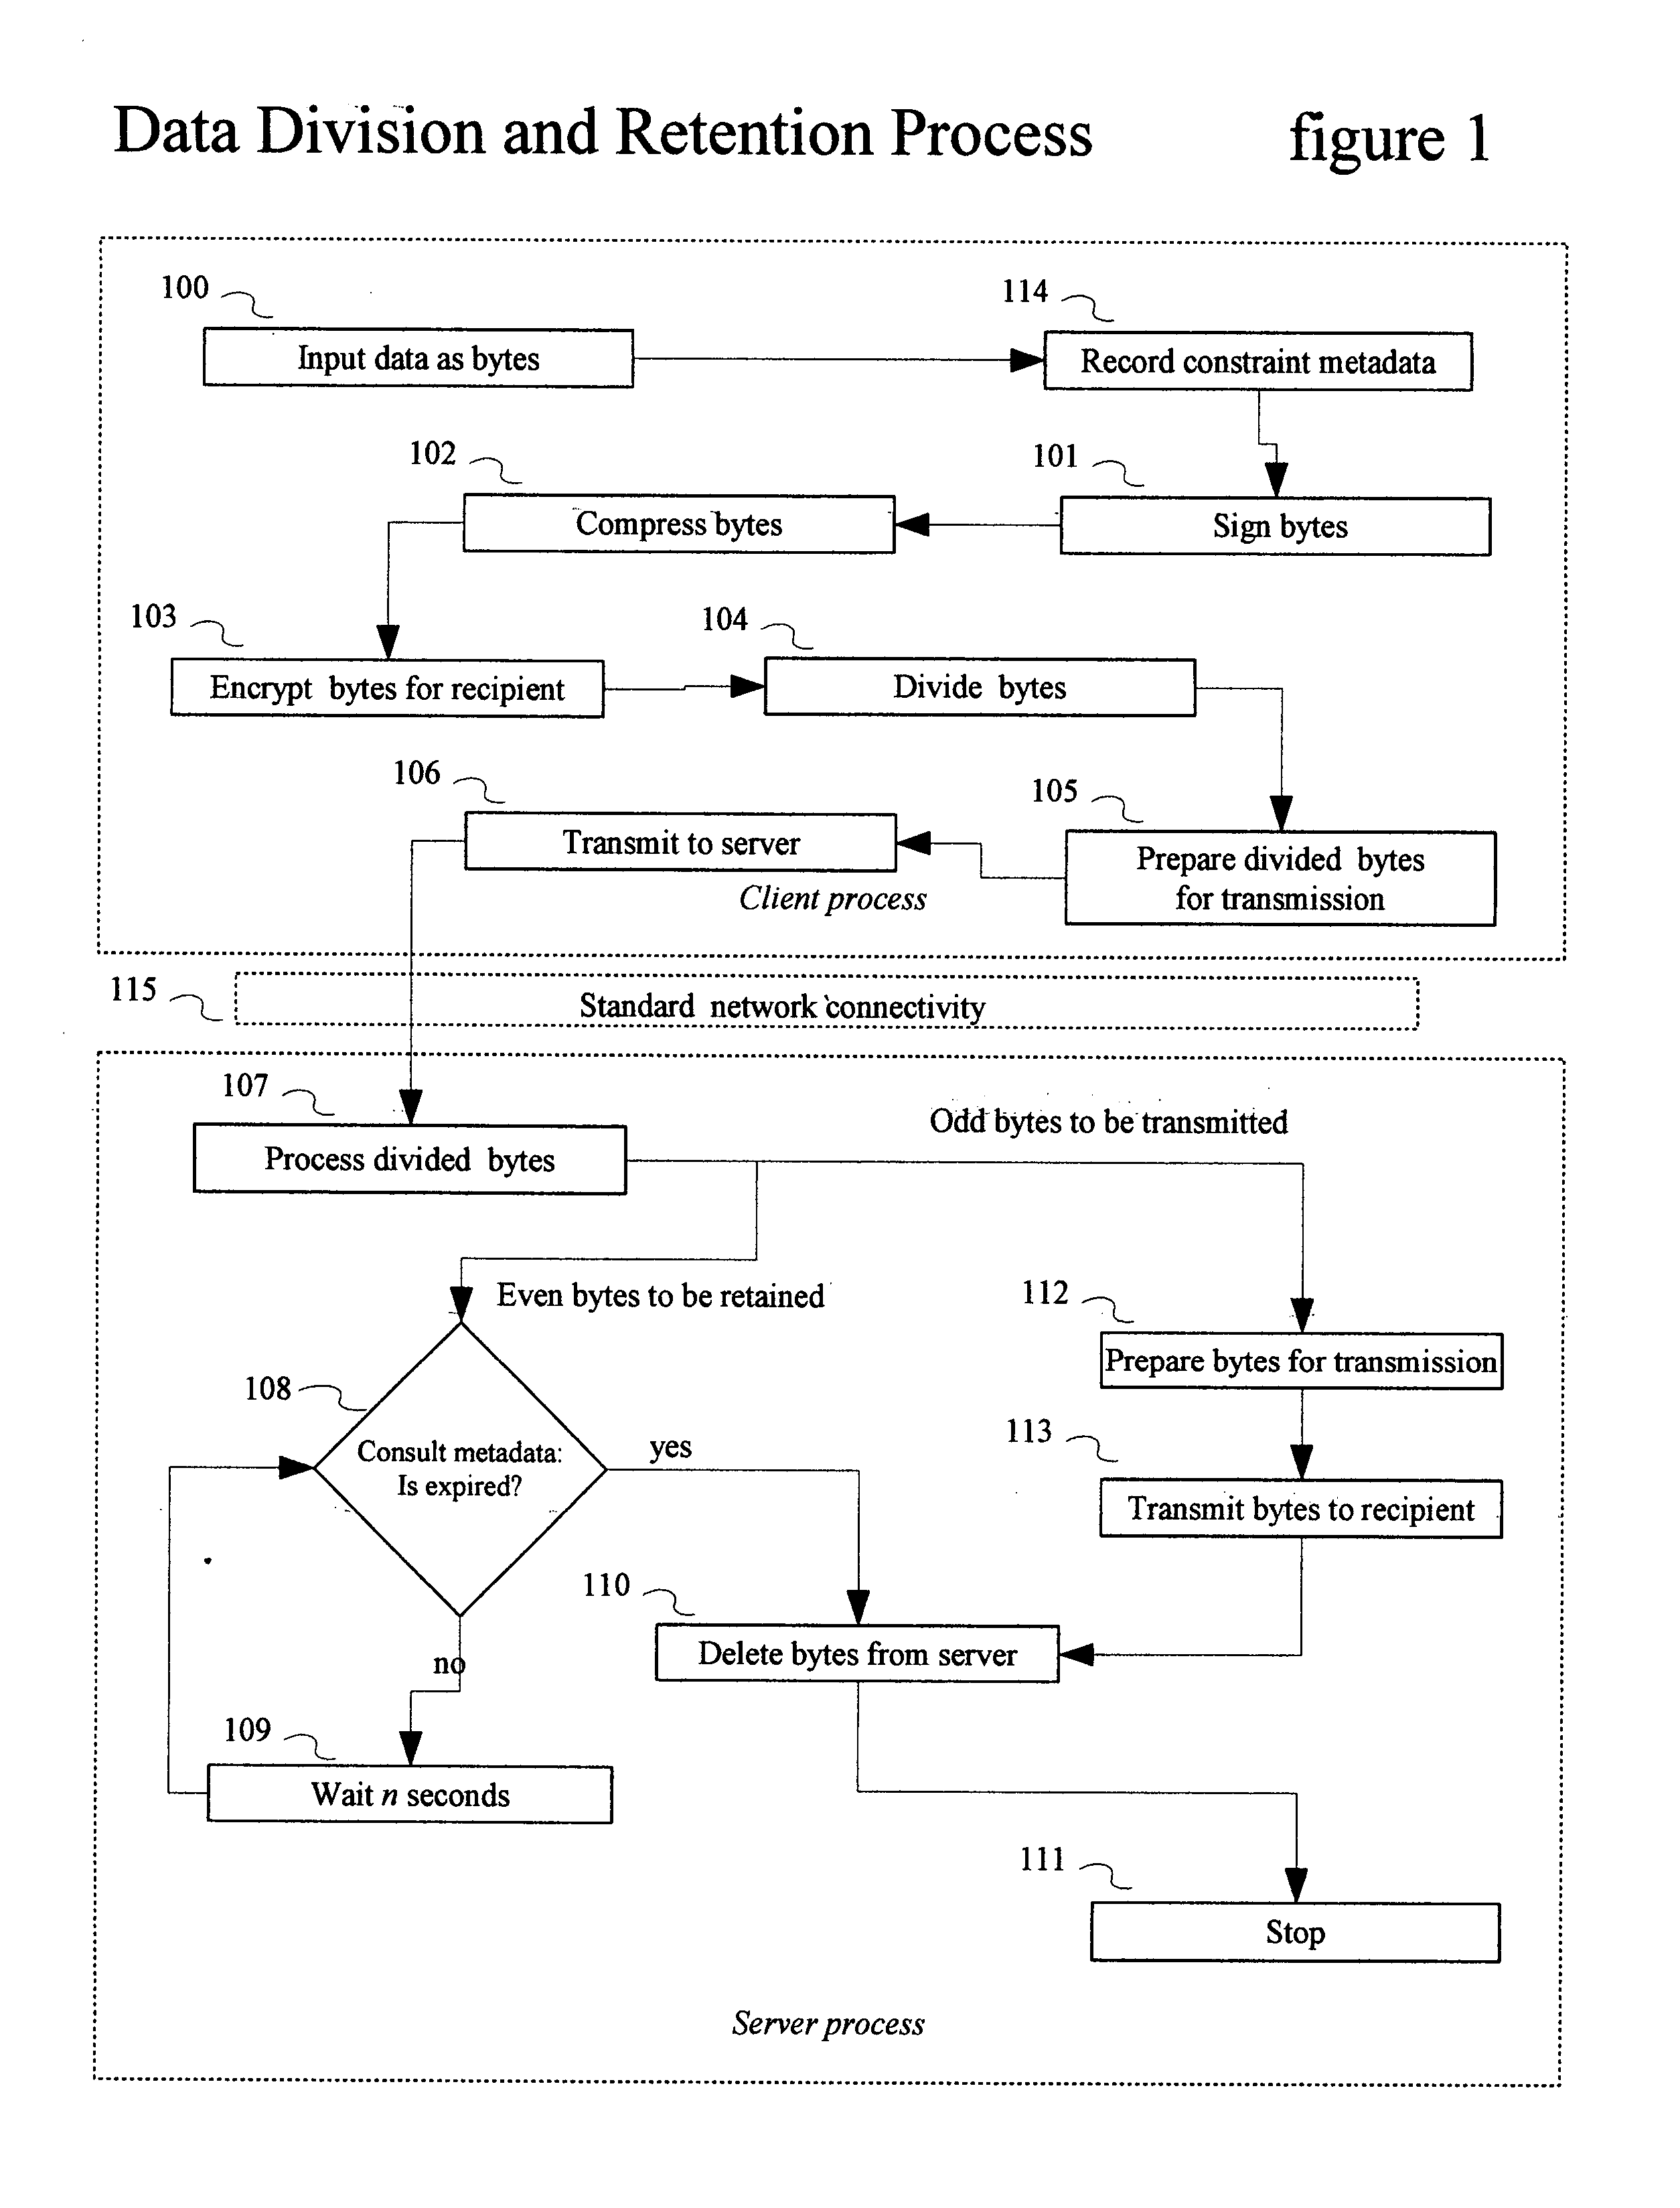 Method and technique for enforcing transience and propagation constraints on data transmitted by one entity to another entity by means of data division and retention